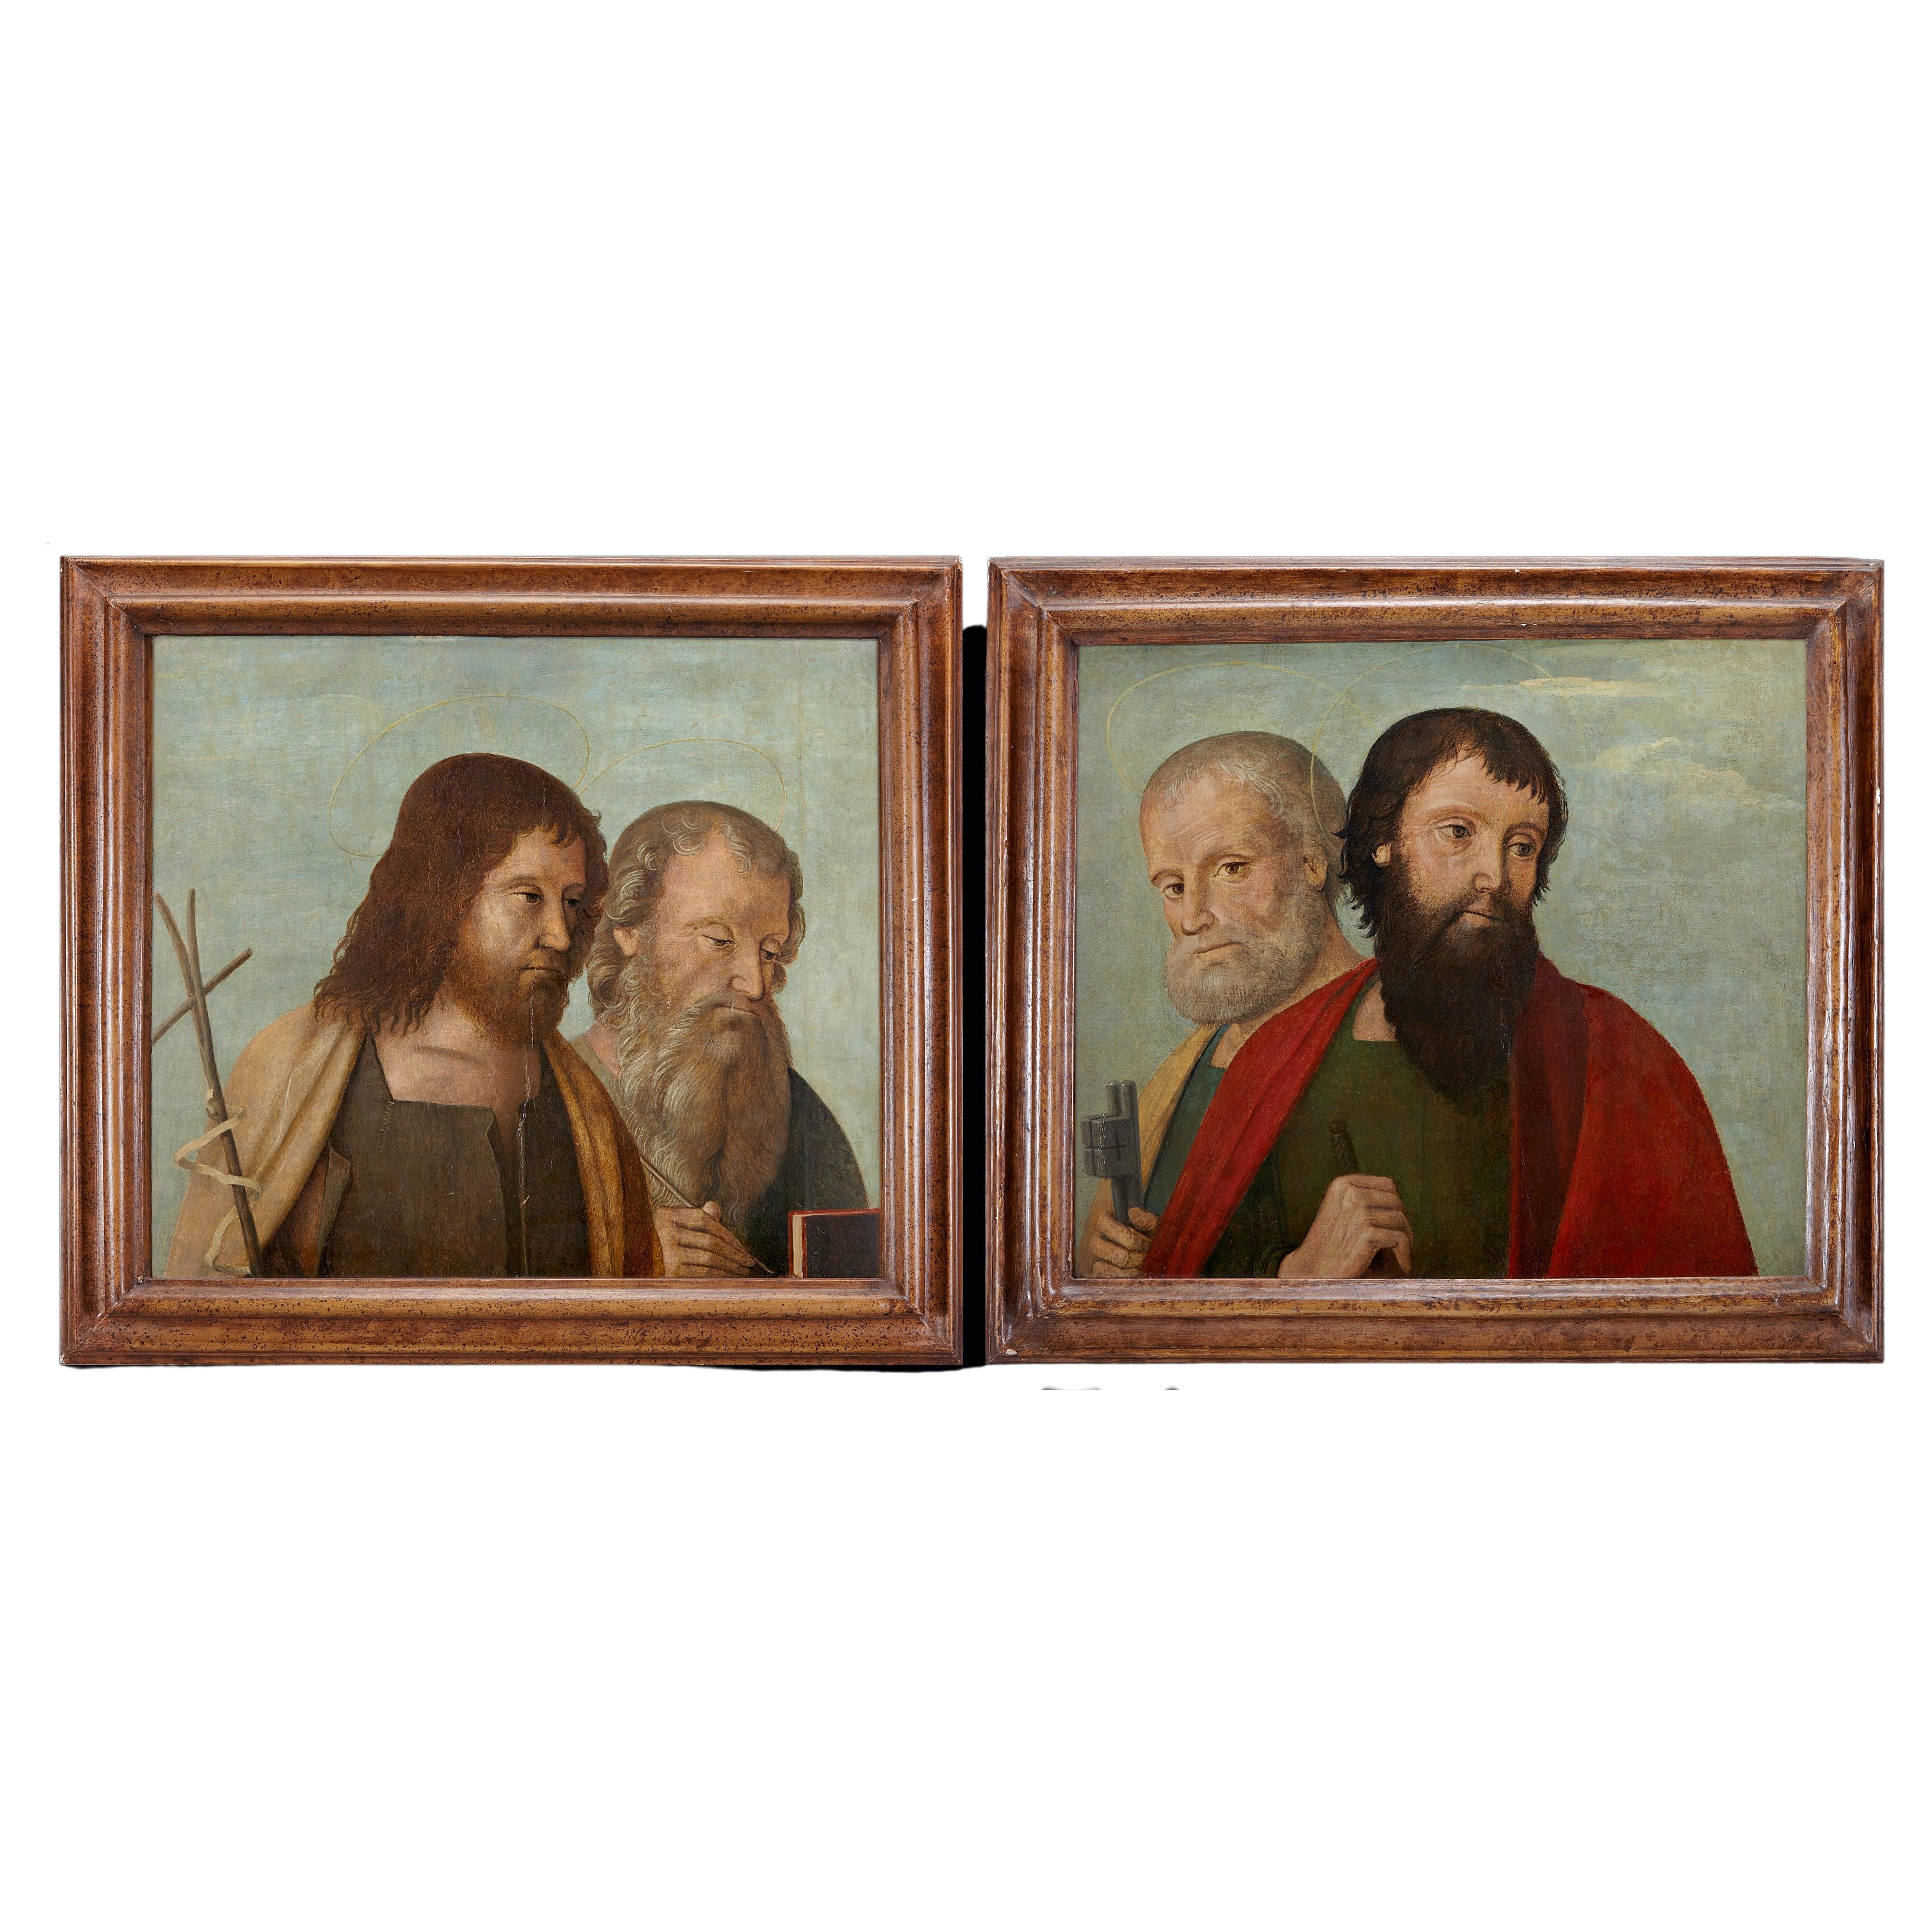 Two Early 16th Century Venetian Panel Paintings of Saints and Apostles